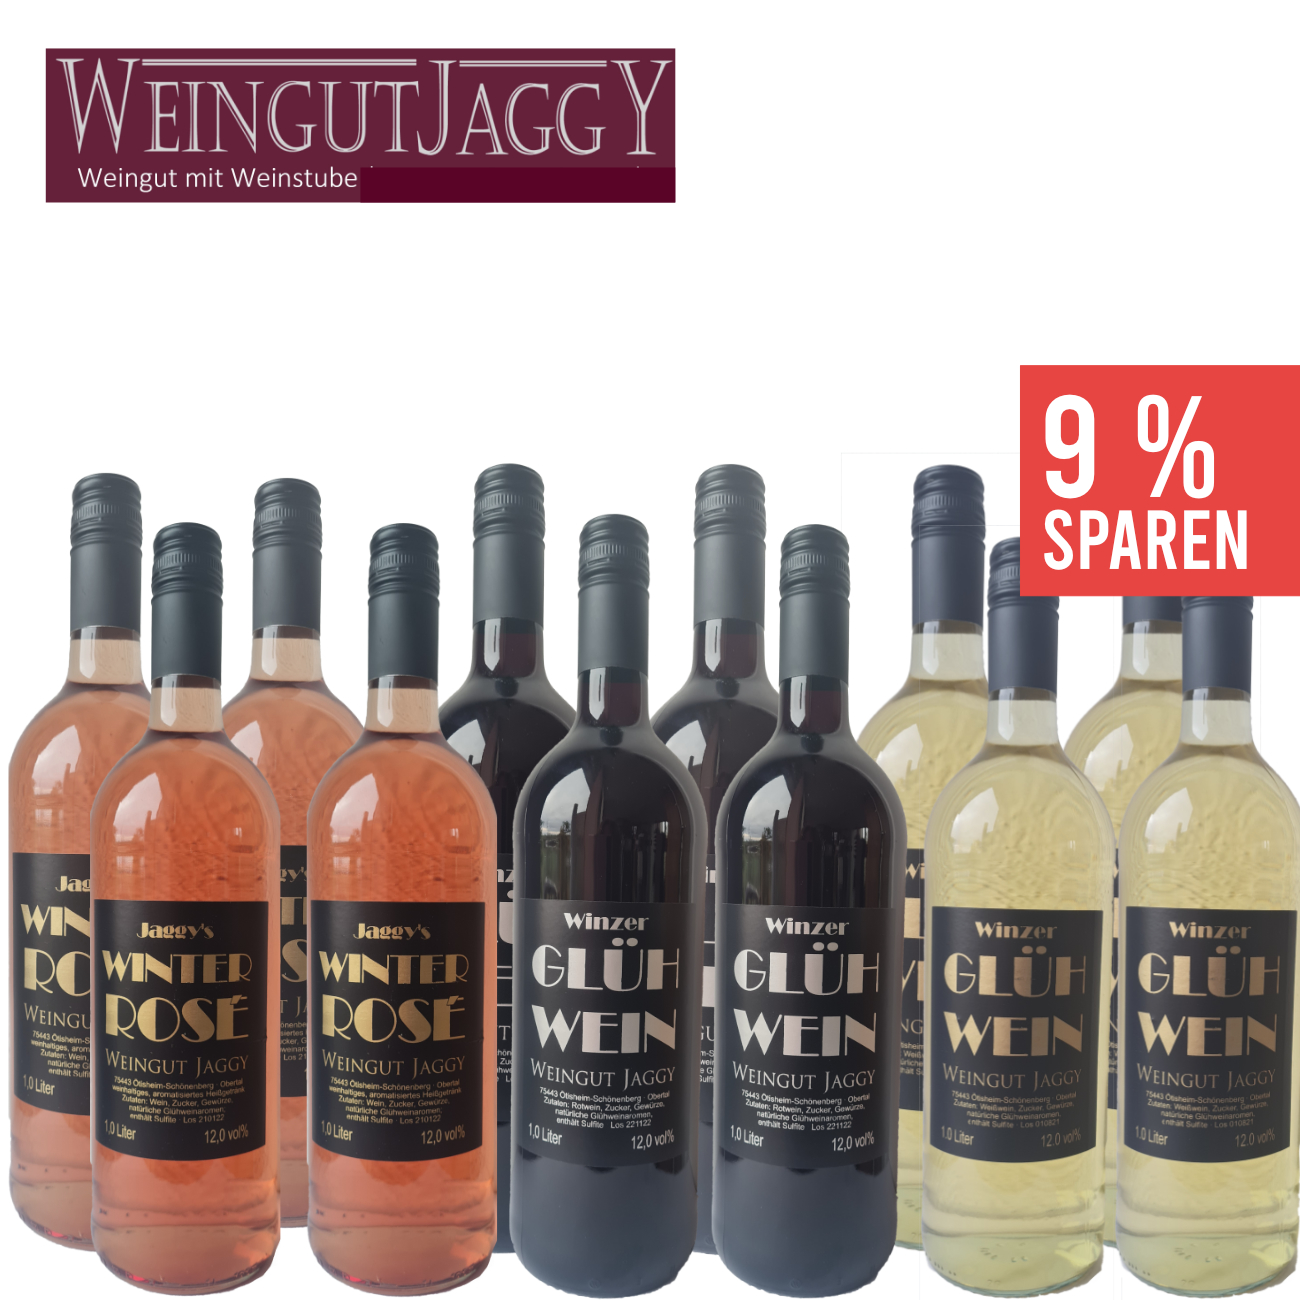 wein.plus of find+buy: find+buy wein.plus our | wines The members